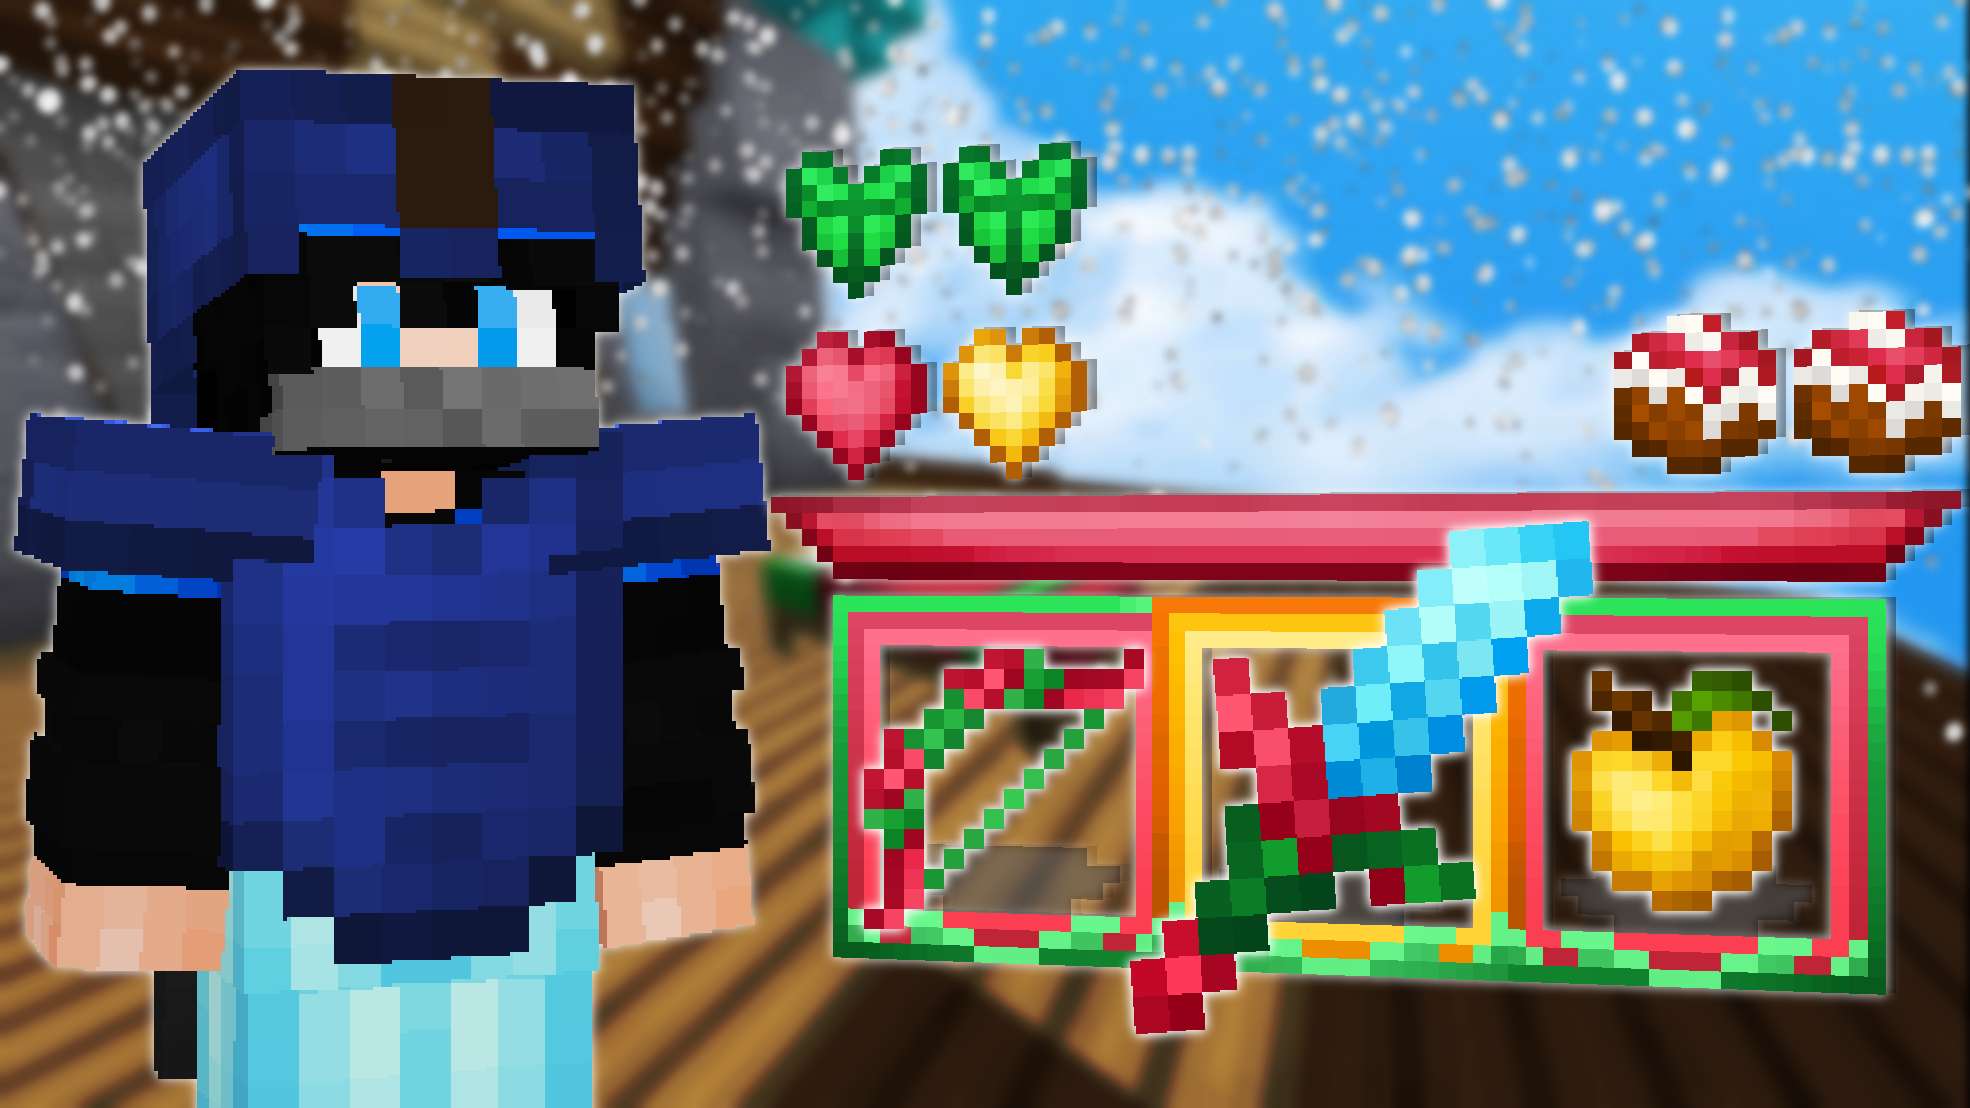 CHRISTMAS 16x by Mqryo on PvPRP